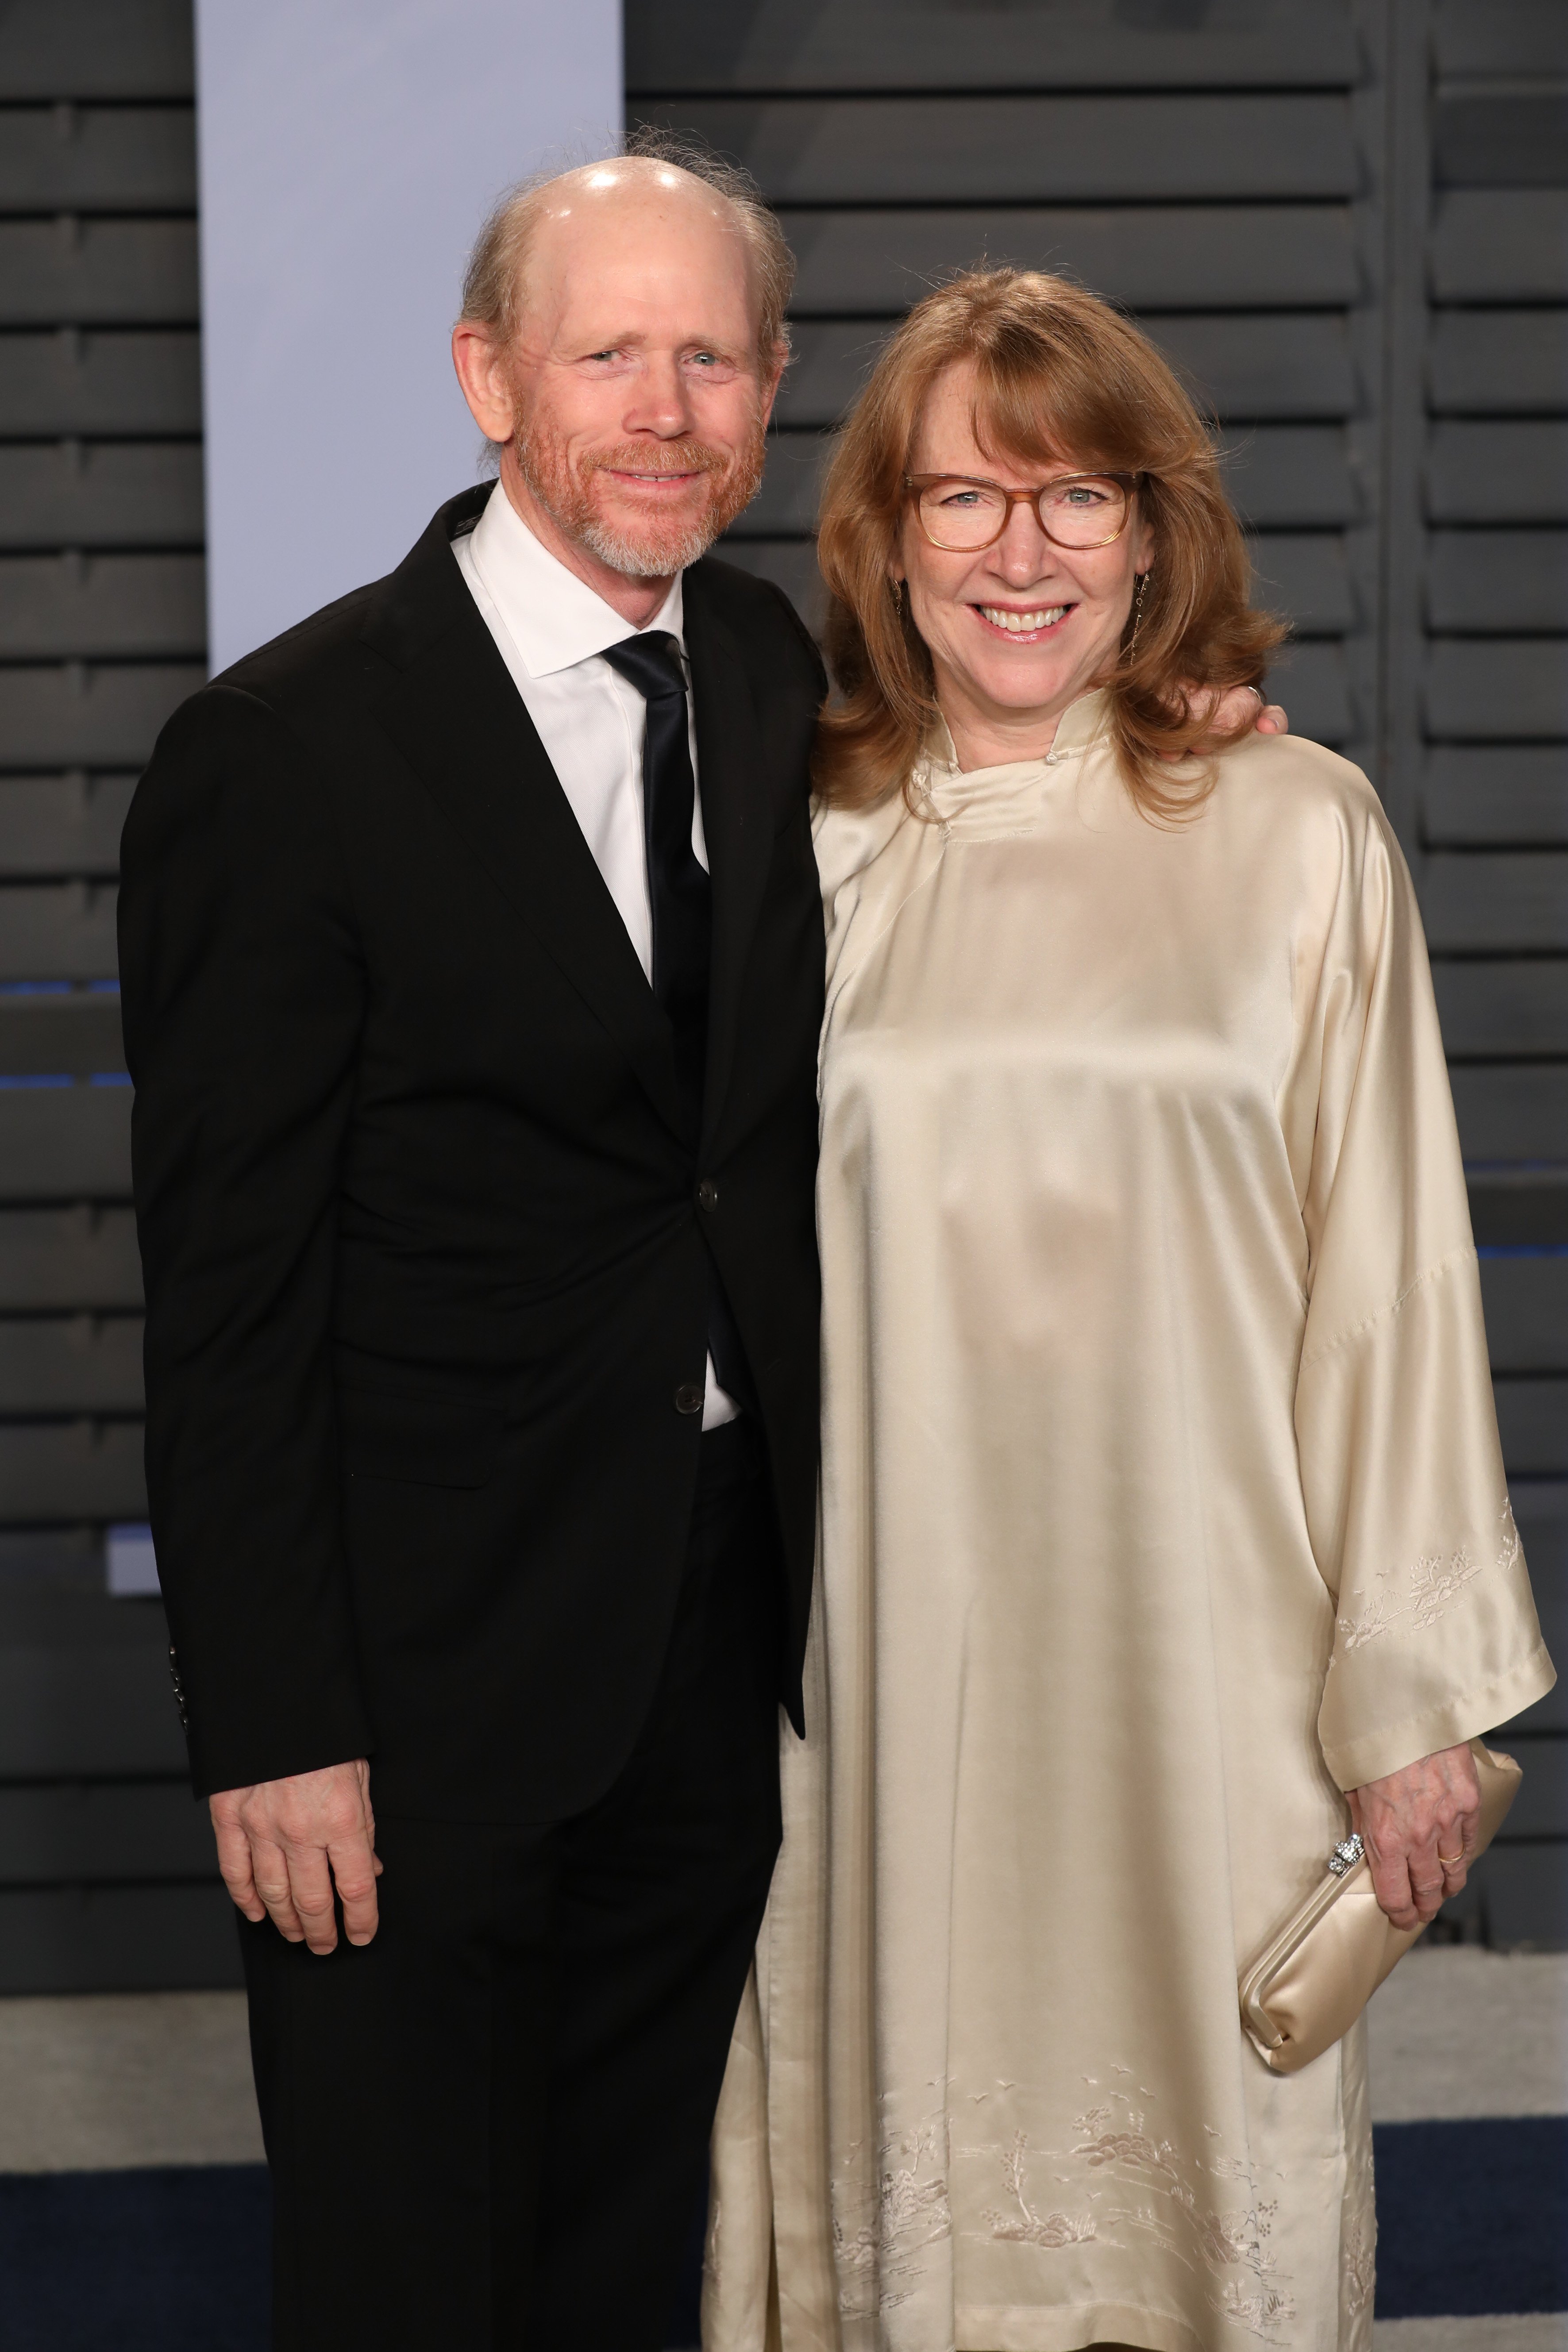 Ron Howard and Cheryl Howard attend the 2018 Vanity Fair Oscar Party on March 04, 2018, in Beverly Hills, California. | Source: Getty Images.